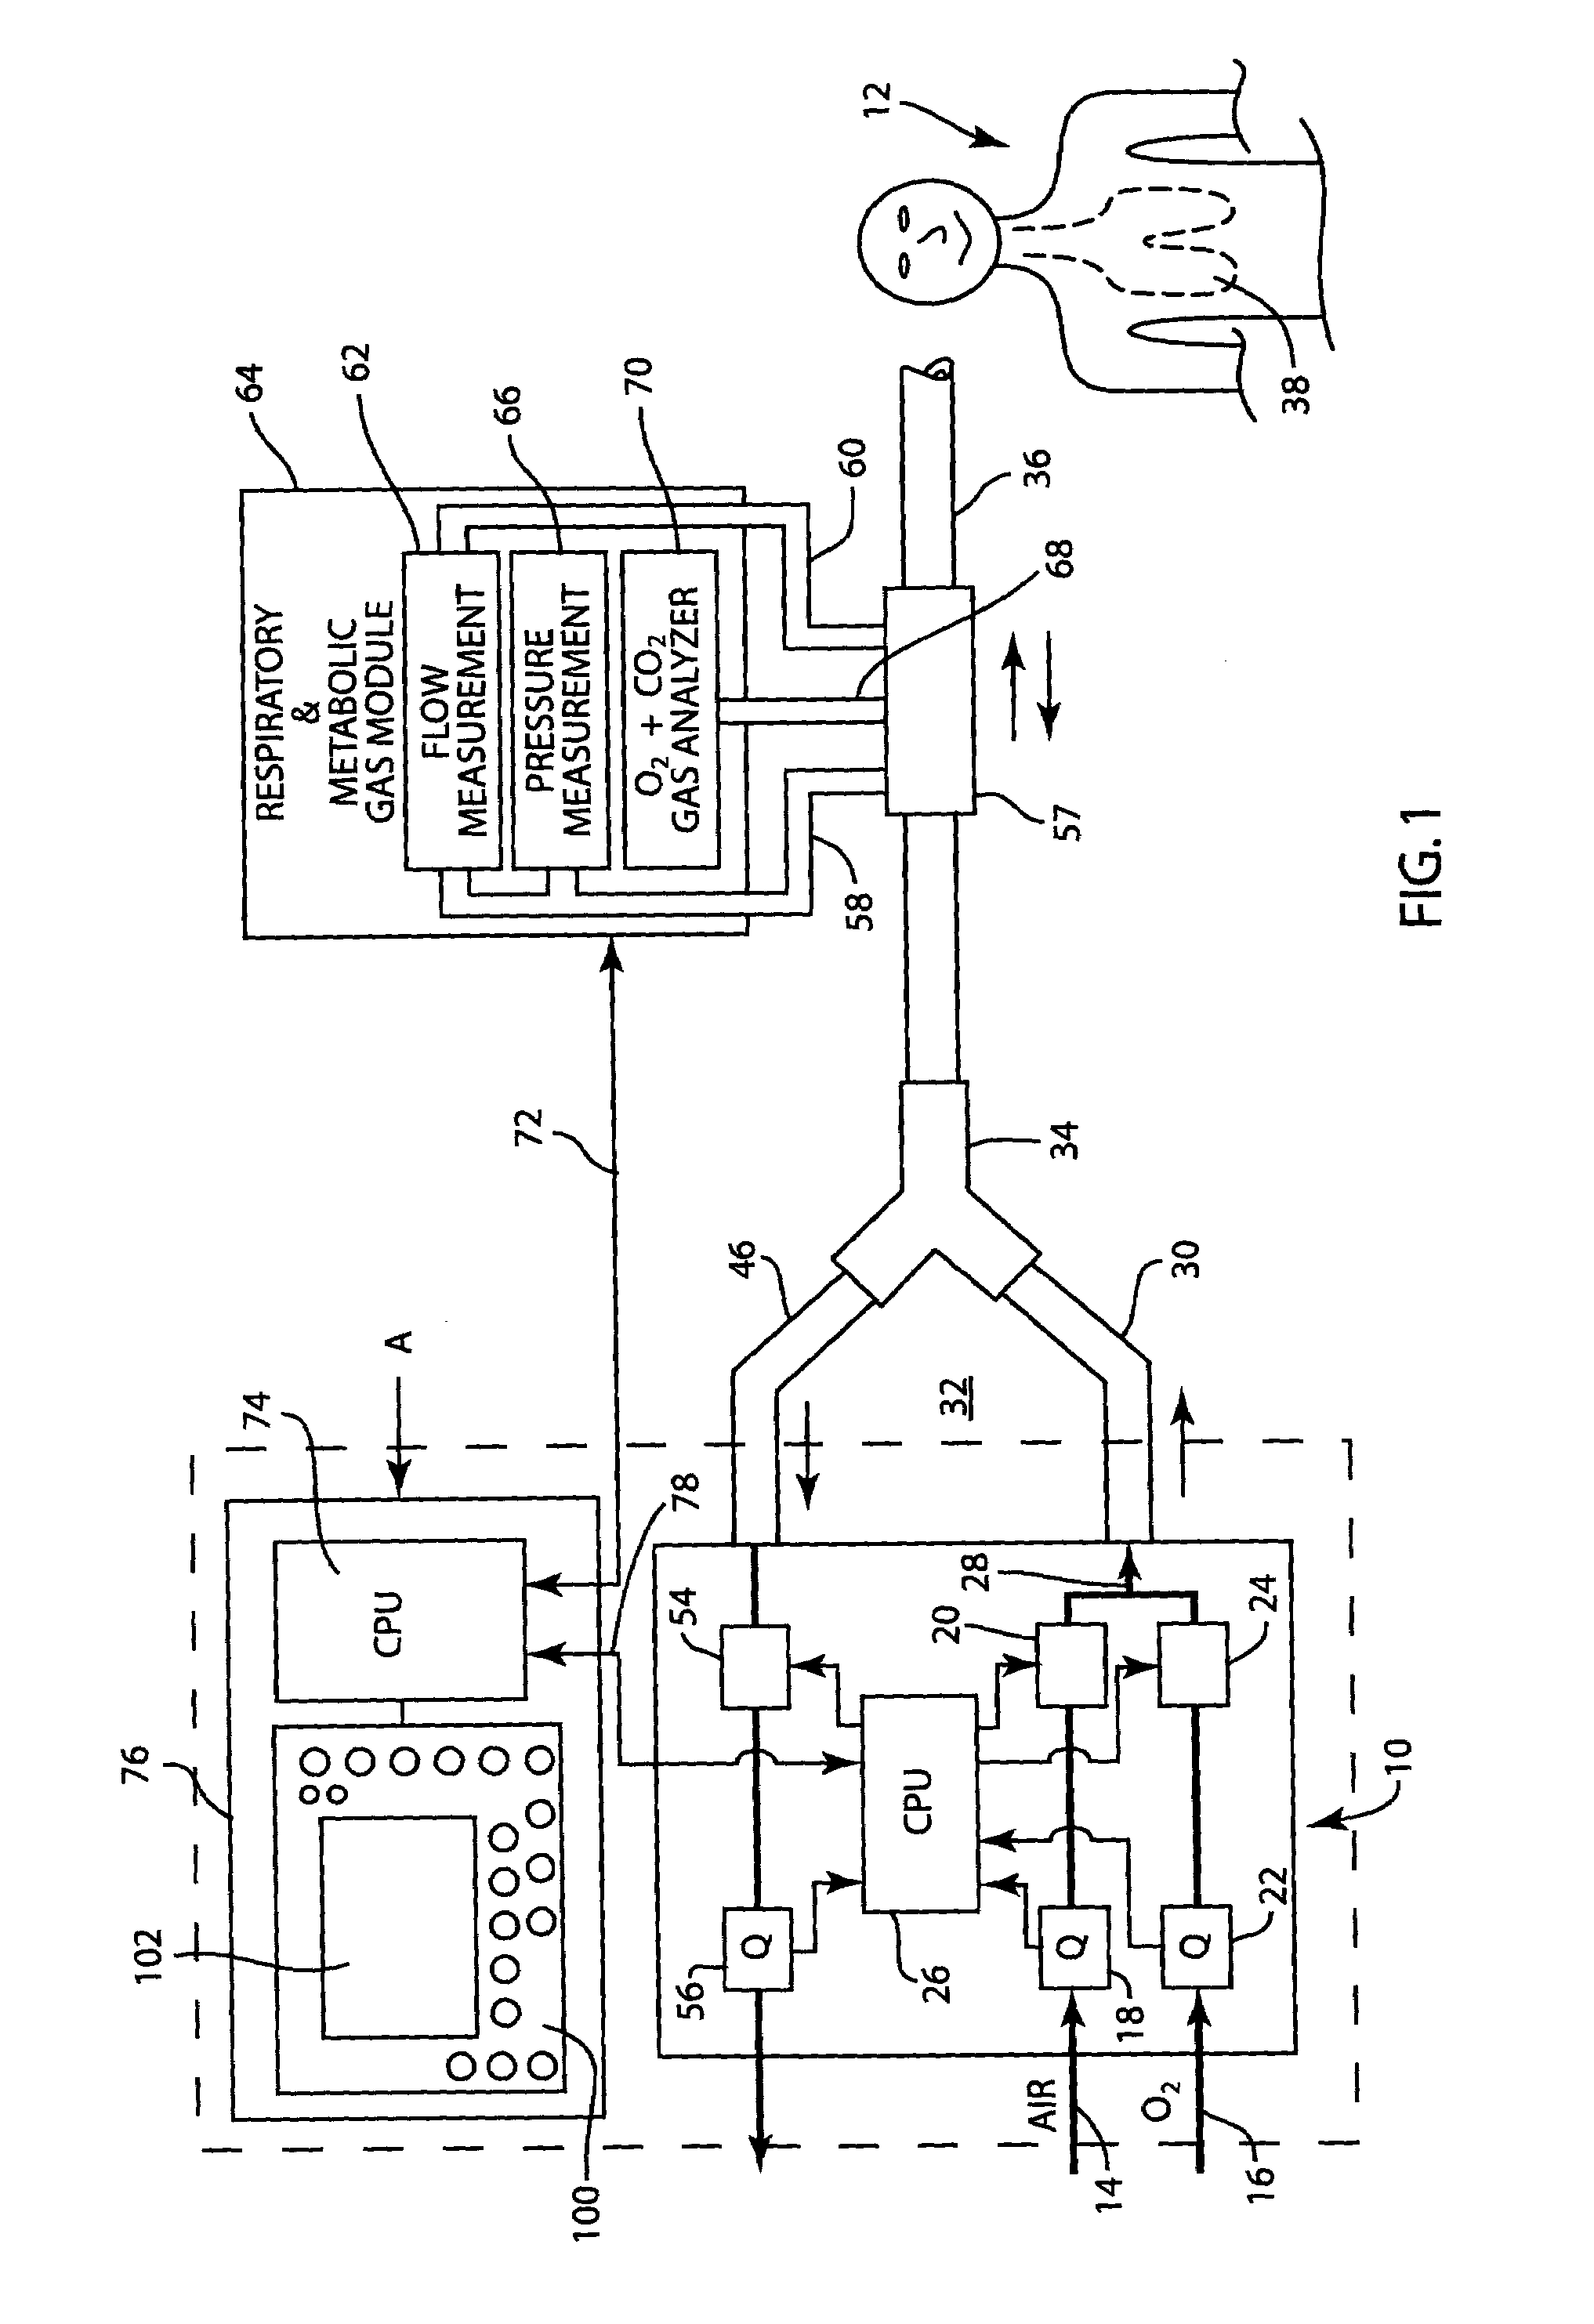 Apparatus and method for determining and displaying functional residual capacity data and related parameters of ventilated patients